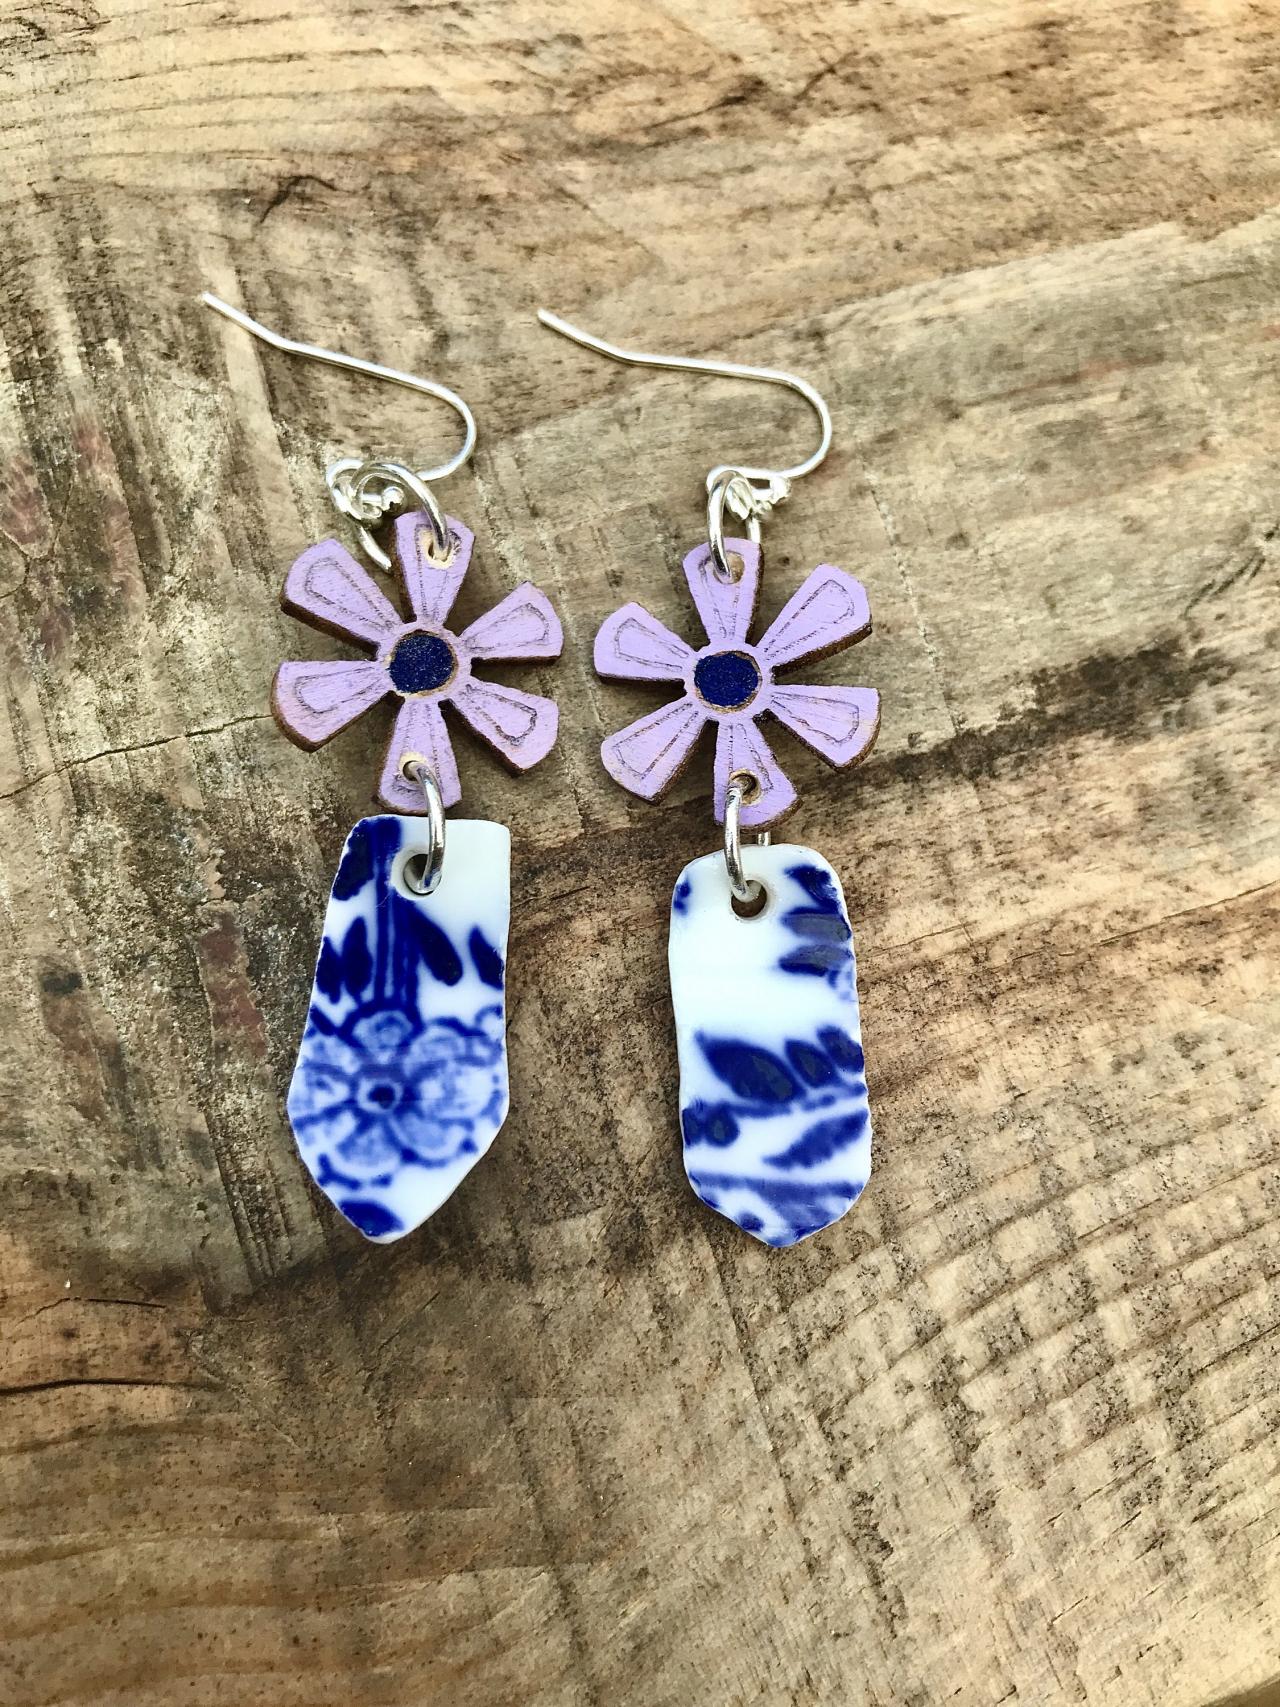 Pretty Purple Wooden Flower And Blue China Earrings With Sterling Silver Wires